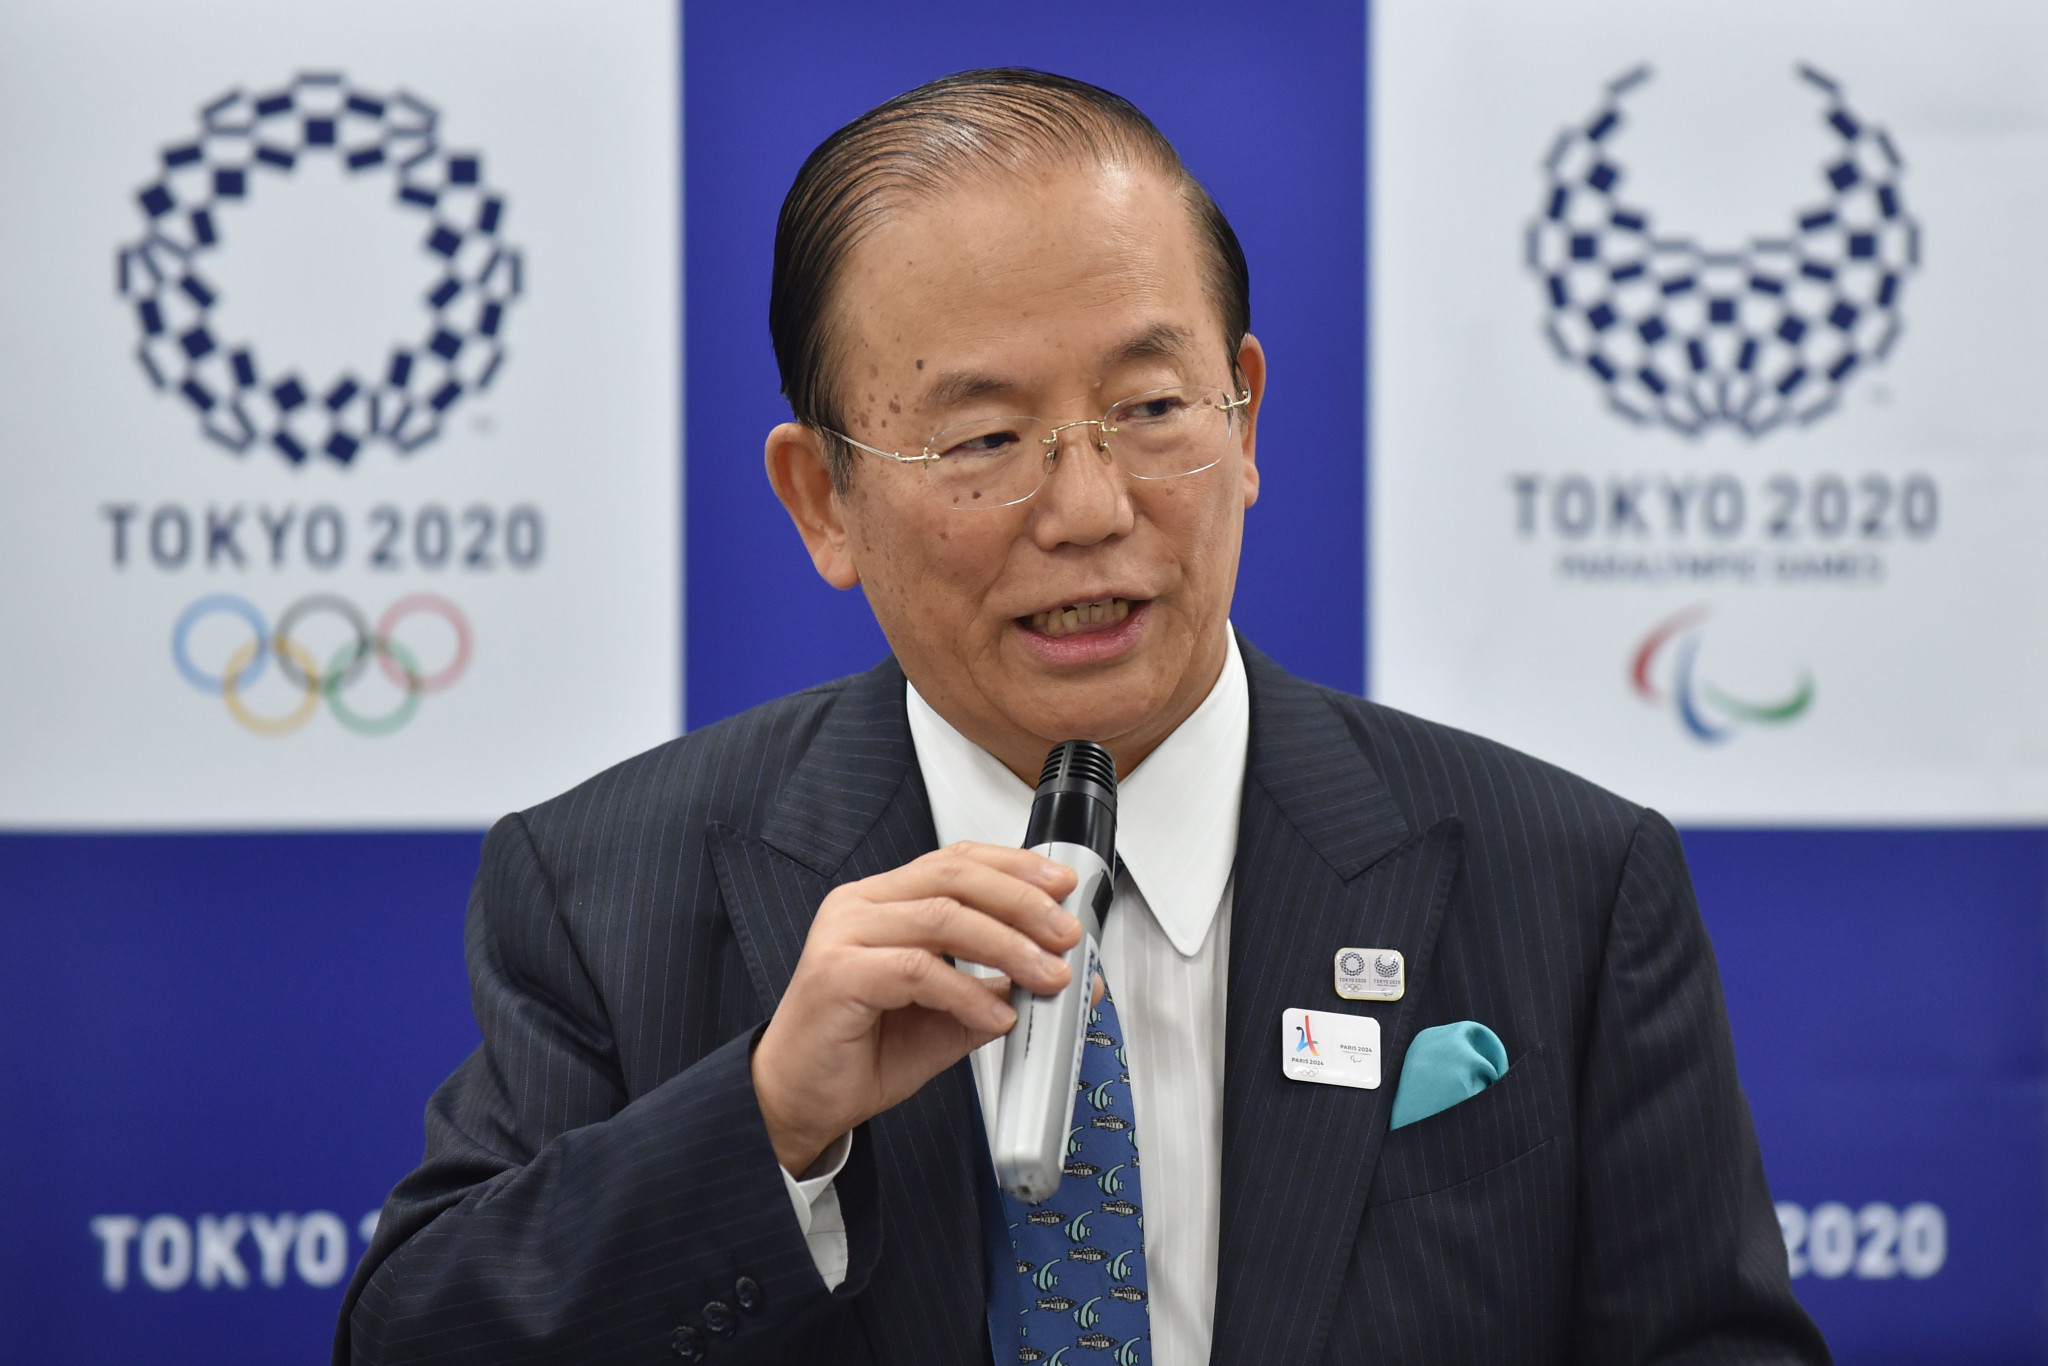 Tokyo 2020 chief executive Toshirō Mutō has claimed the Organising Committee is making "steady progress in all areas" when opening its inaugural World Press Briefing here today ©Getty Images